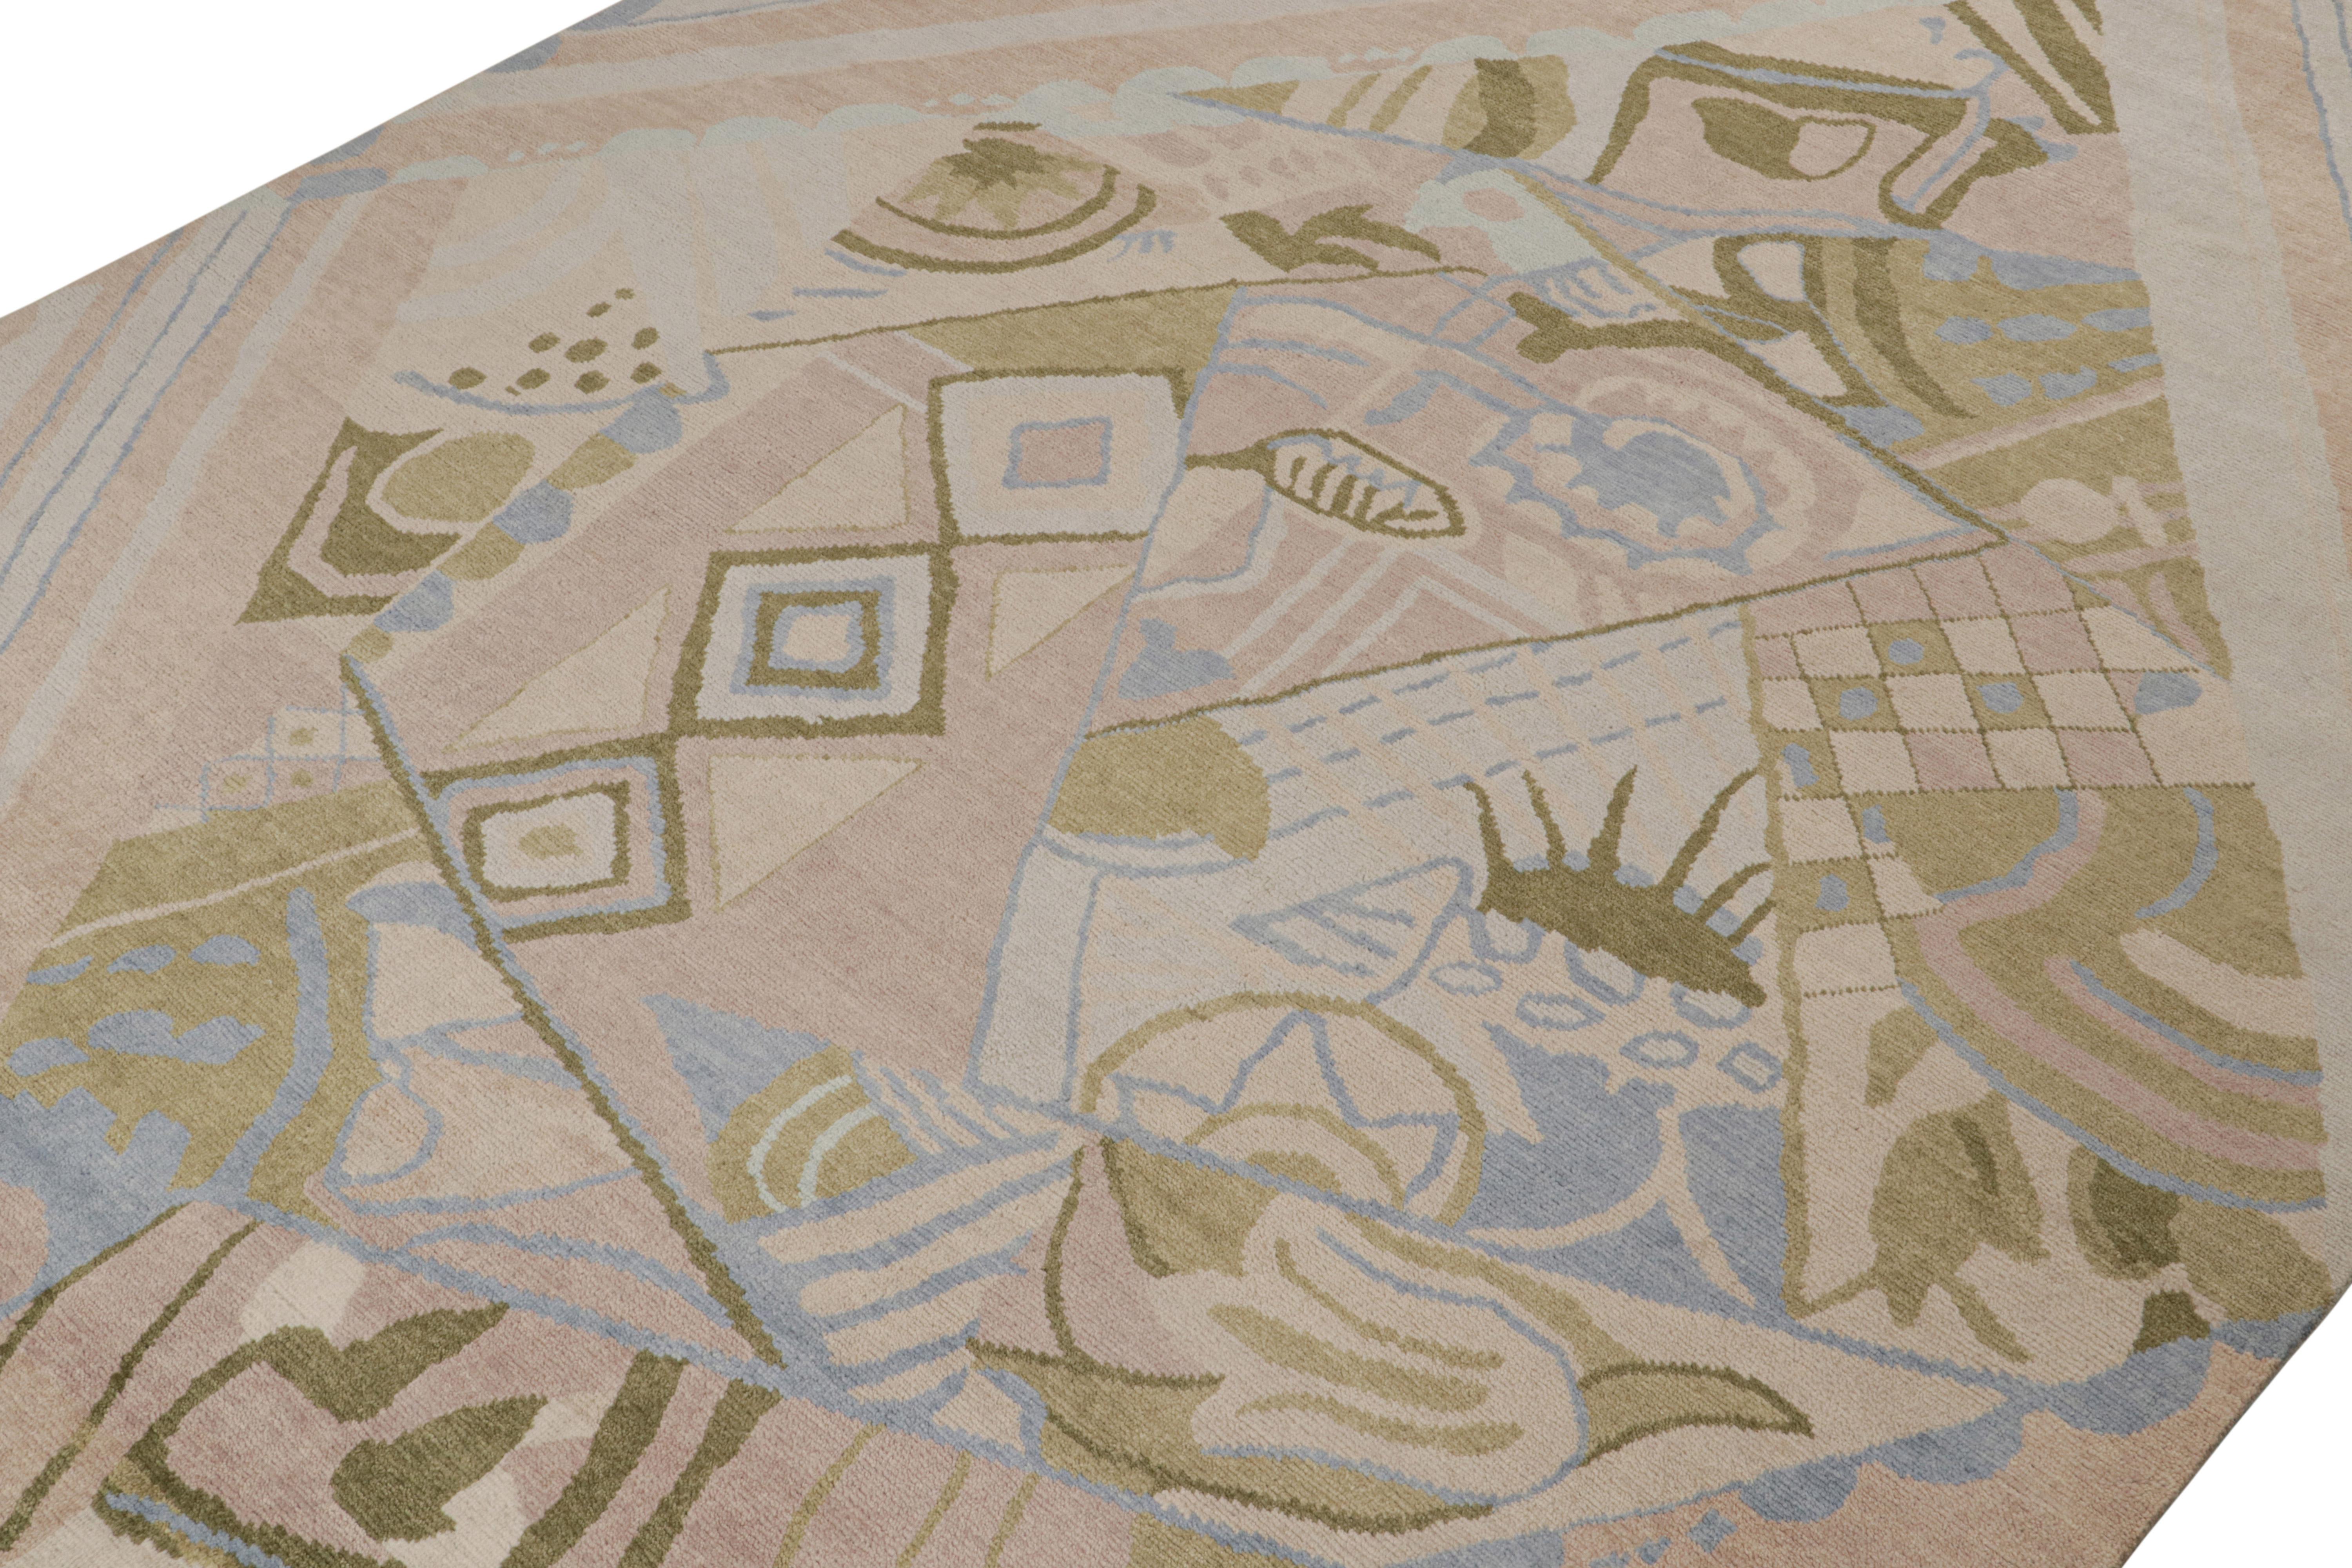 This 10x15 ode to French Art Deco rugs is the next addition to Rug & Kilim’s newly inspired Deco Collection. hand knotted in wool.

Further on the Design: 

This piece boasts the Deco style of the 1920s and reimagines it with new possibilities